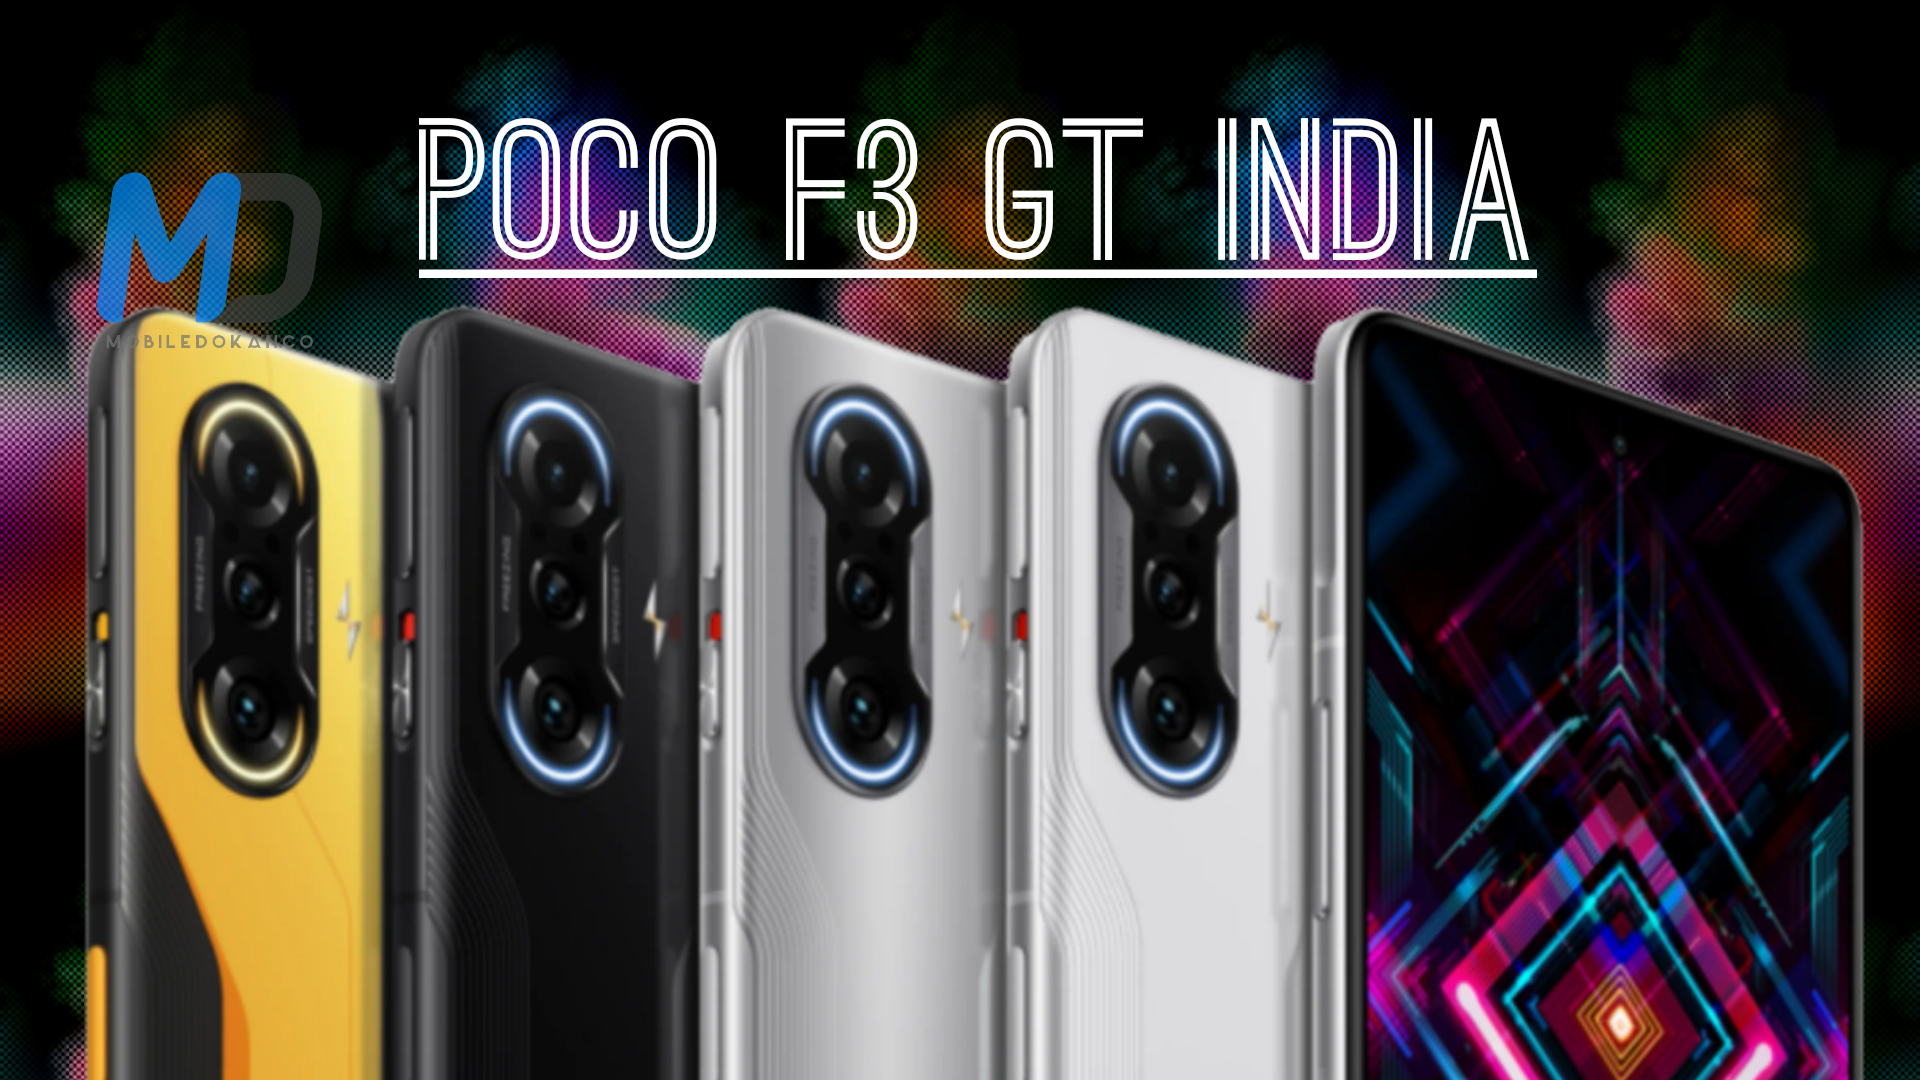 POCO F3 GT India confirmed to launch with Dimensity 1200